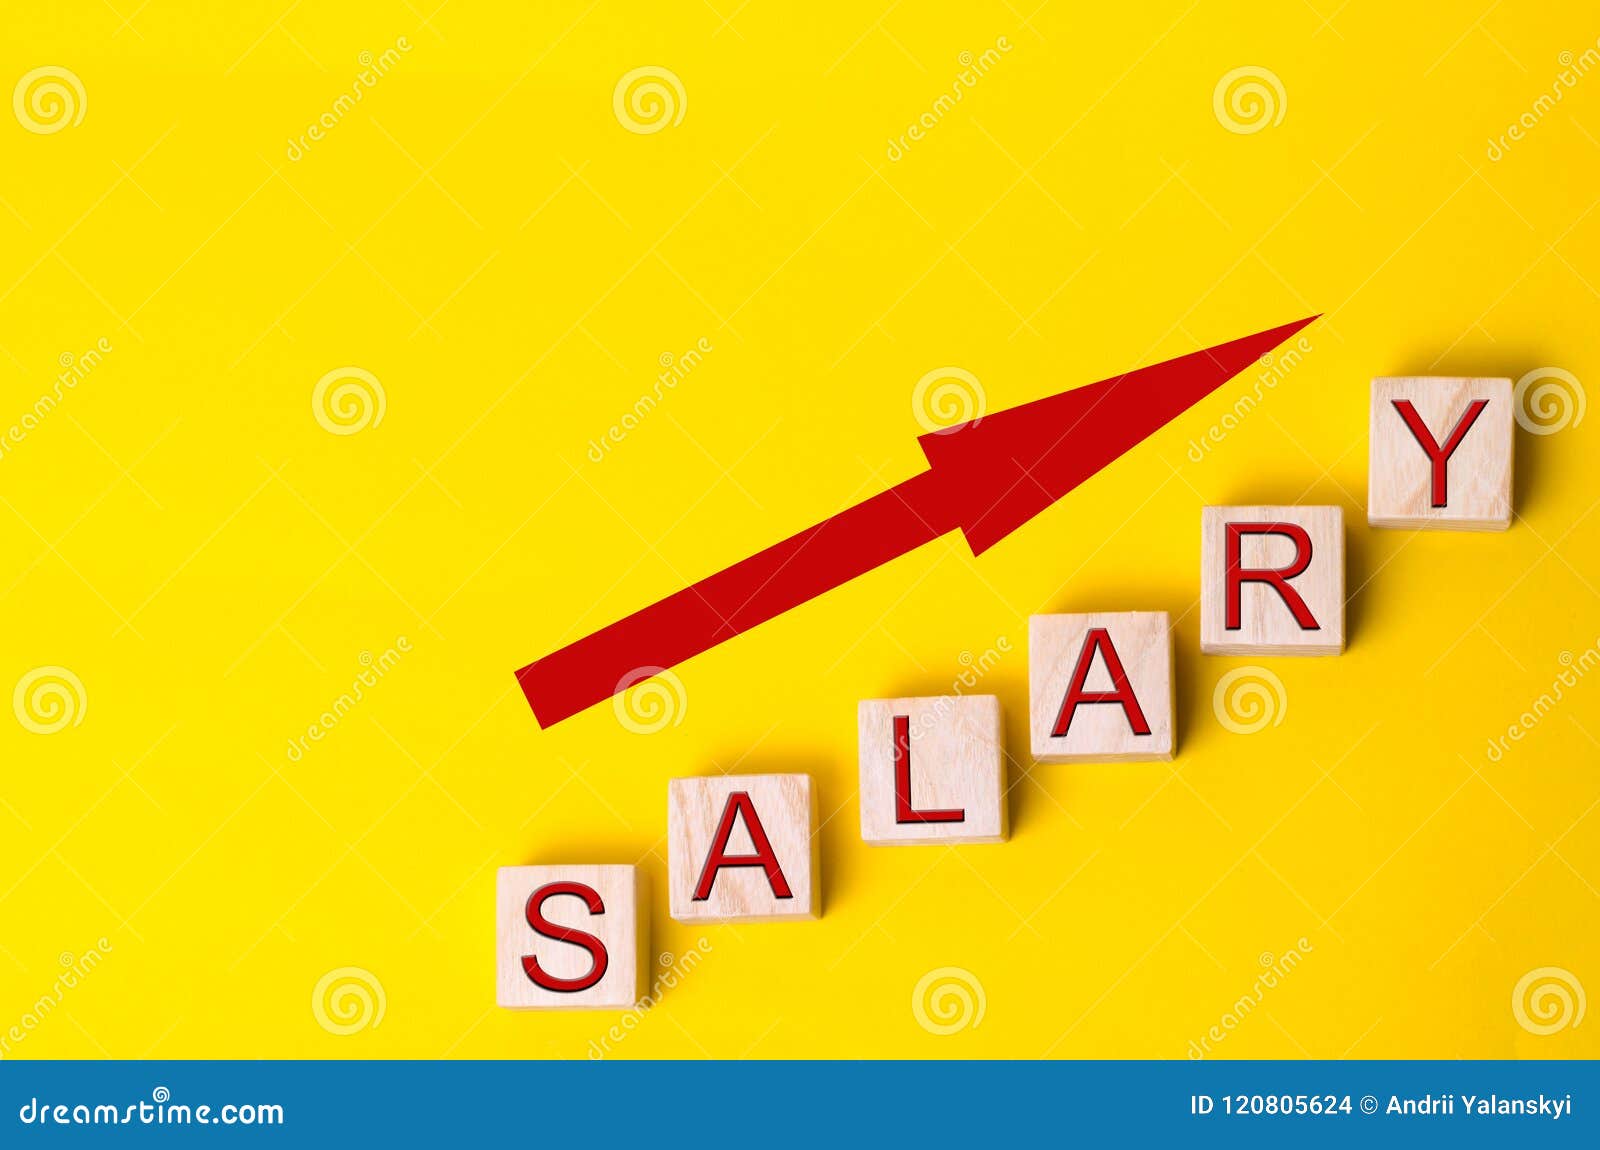 increase of salary, wage rates. promotion, career growth. raising the standard of living.